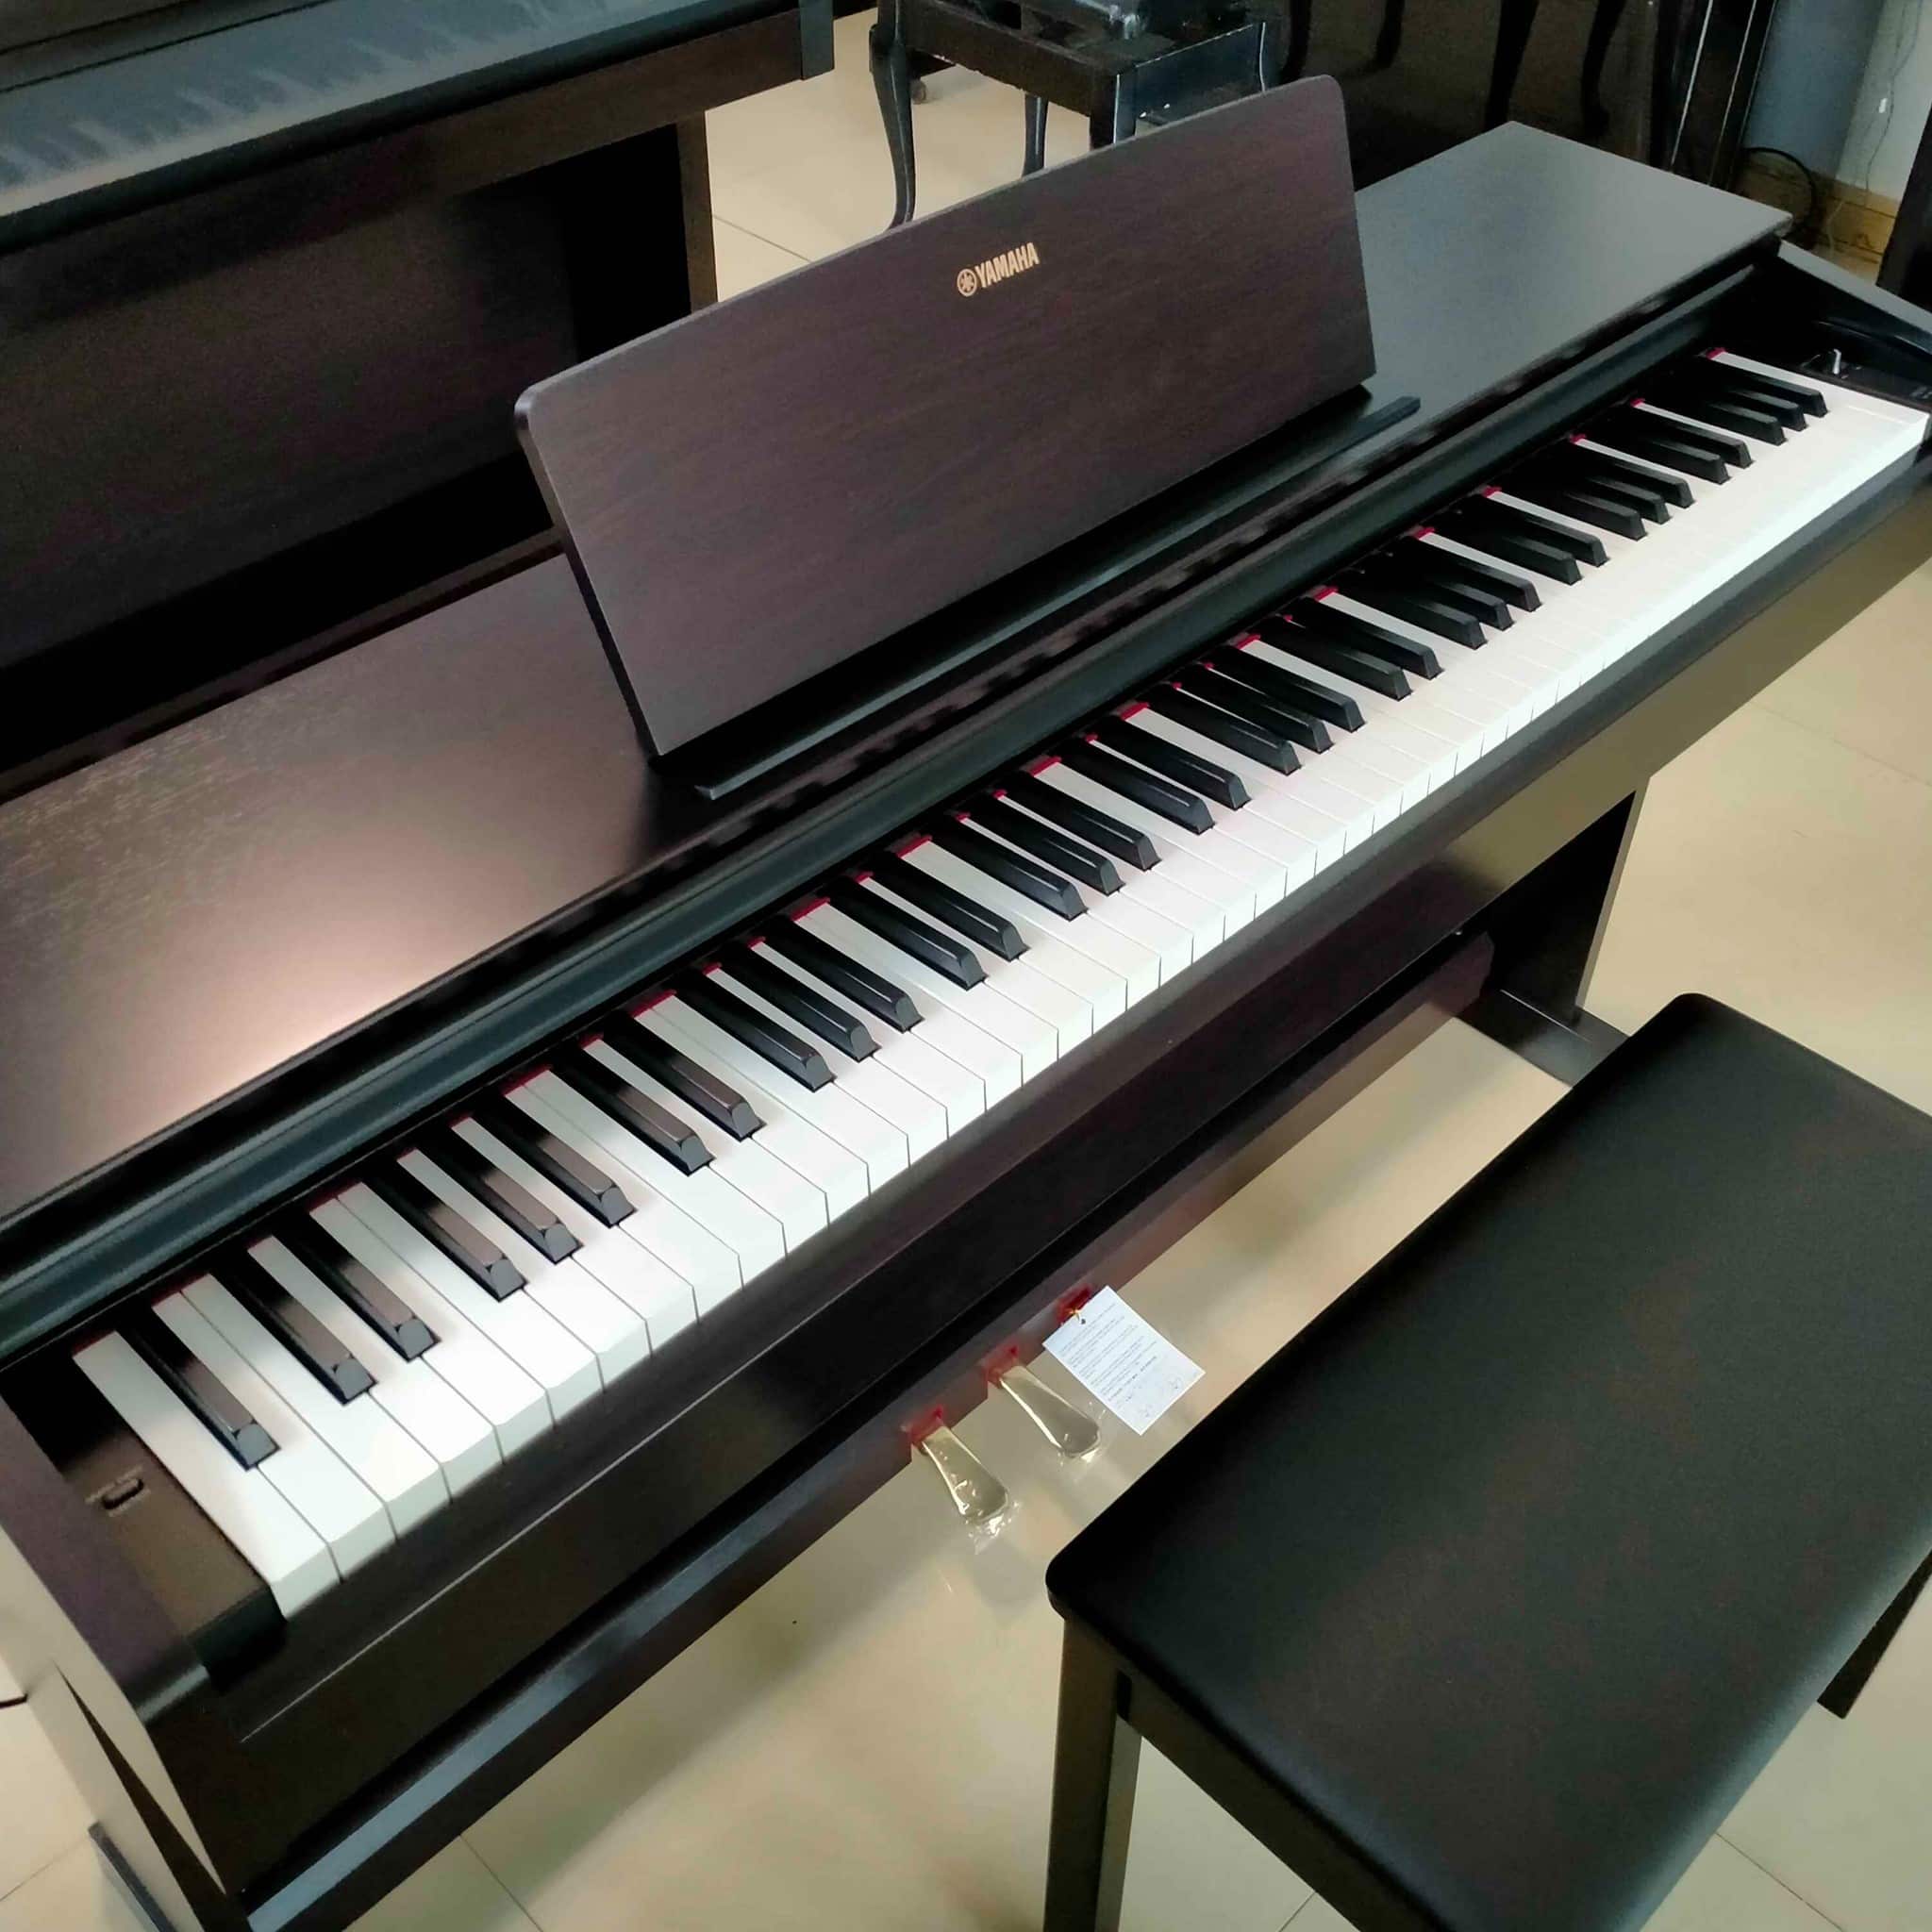 The YDP-103 has a very subtle coating designed to replicate the texture of real wooden keys on an acoustic piano